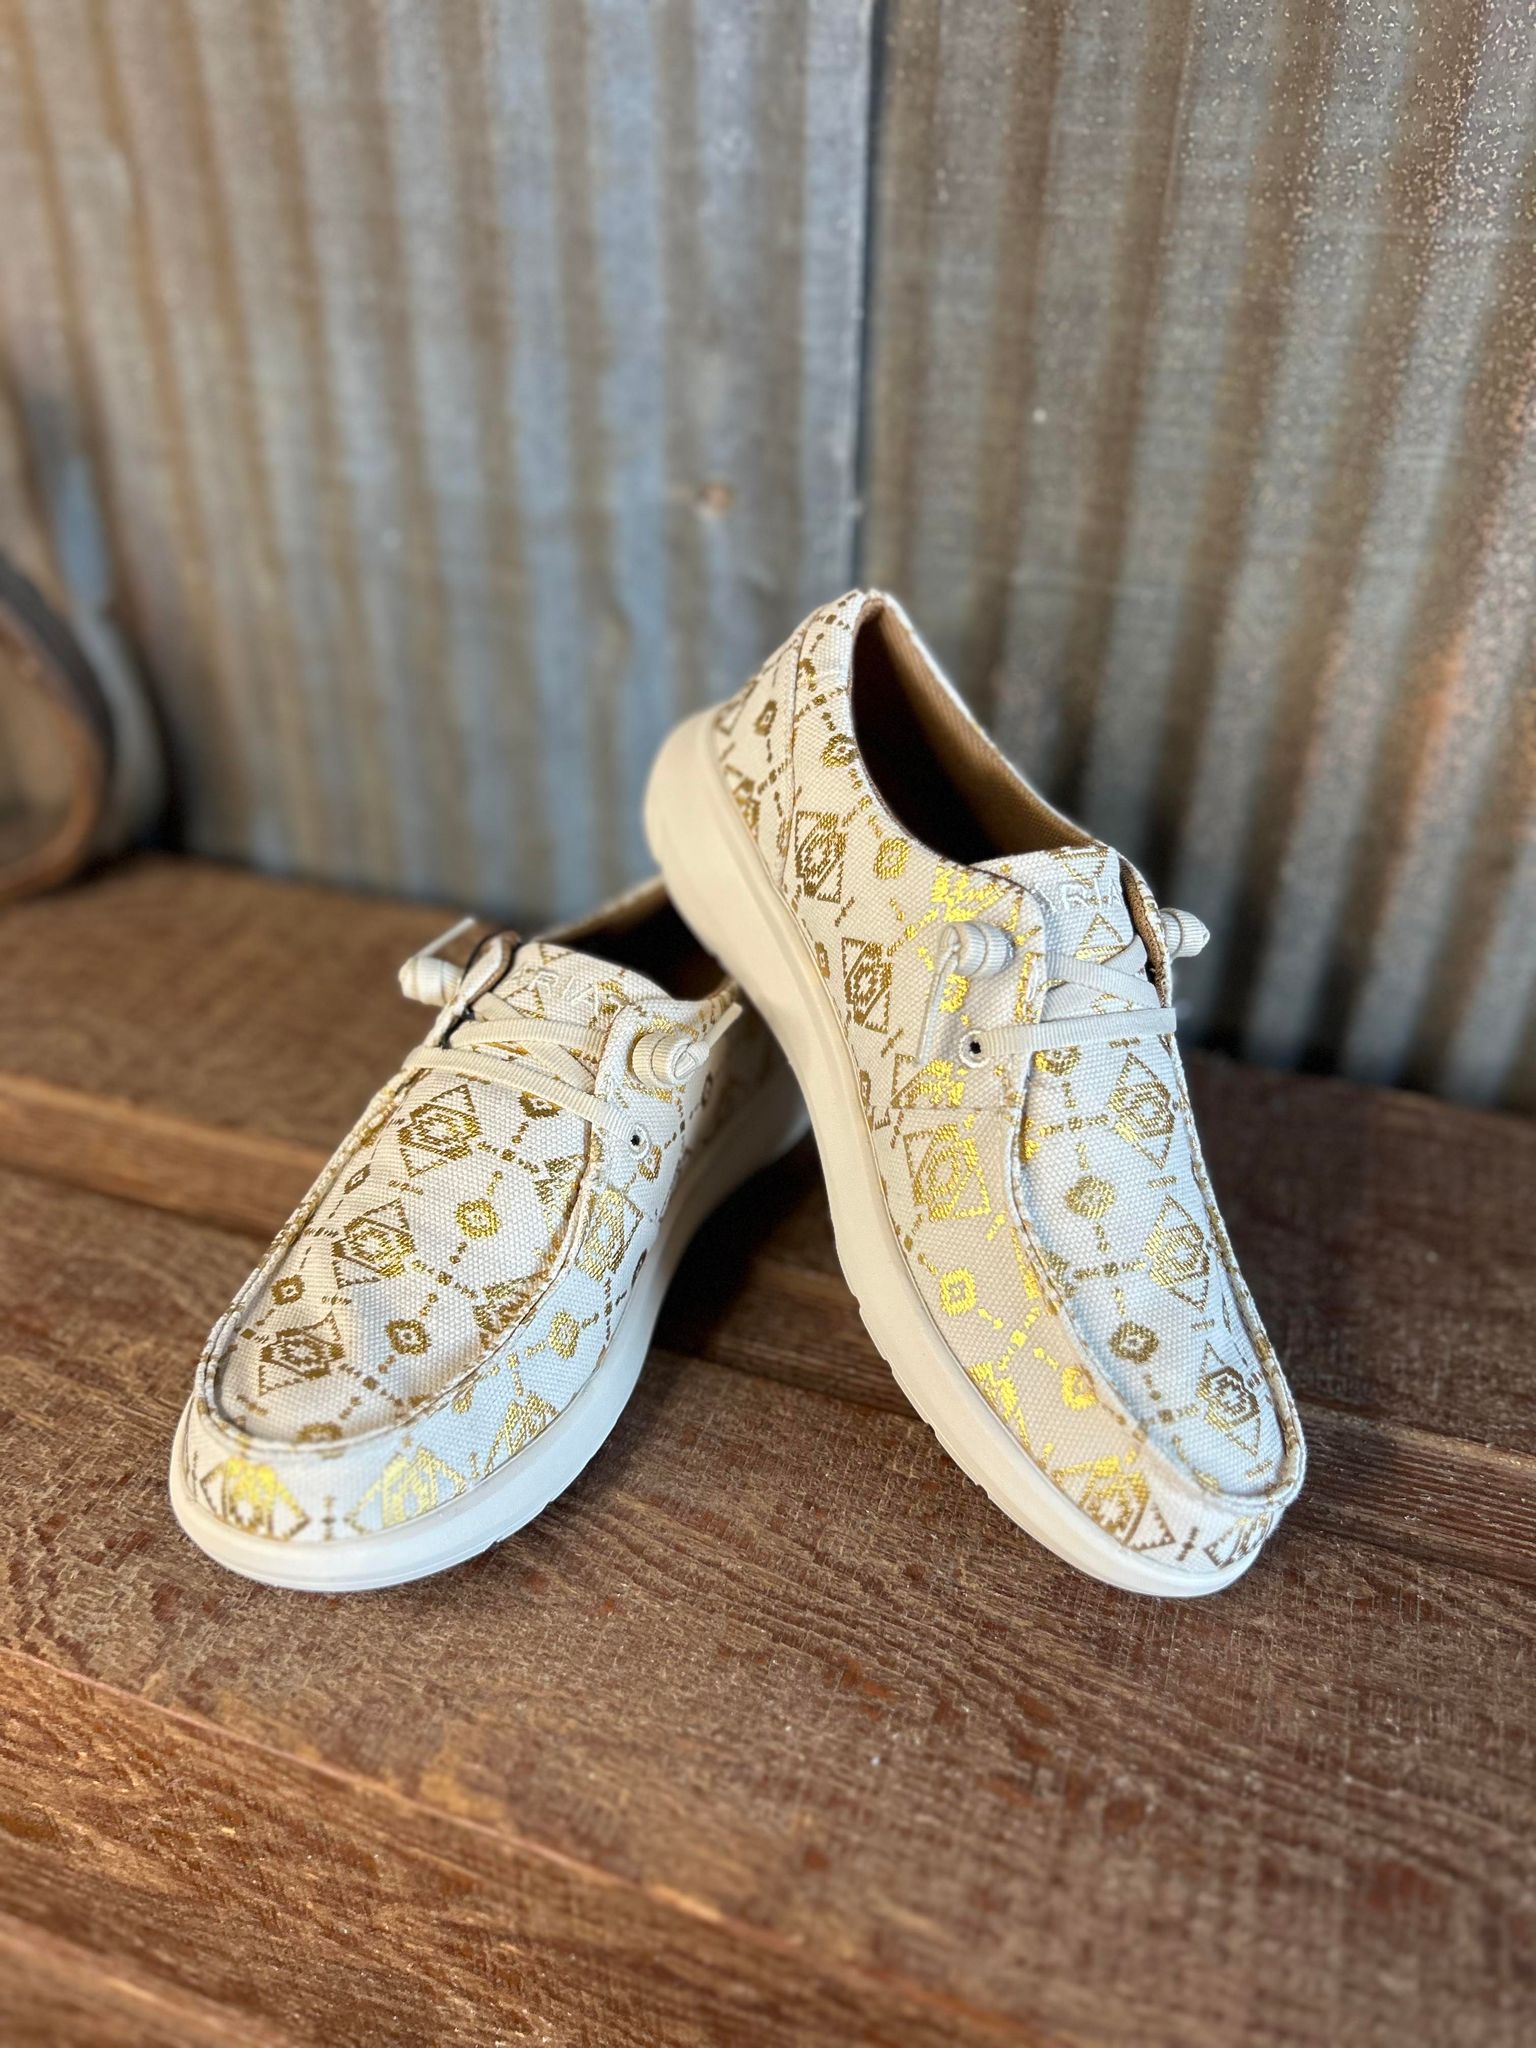 Ariat Women's Gilded Pecos Hilos-Women's Casual Shoes-Ariat-Lucky J Boots & More, Women's, Men's, & Kids Western Store Located in Carthage, MO